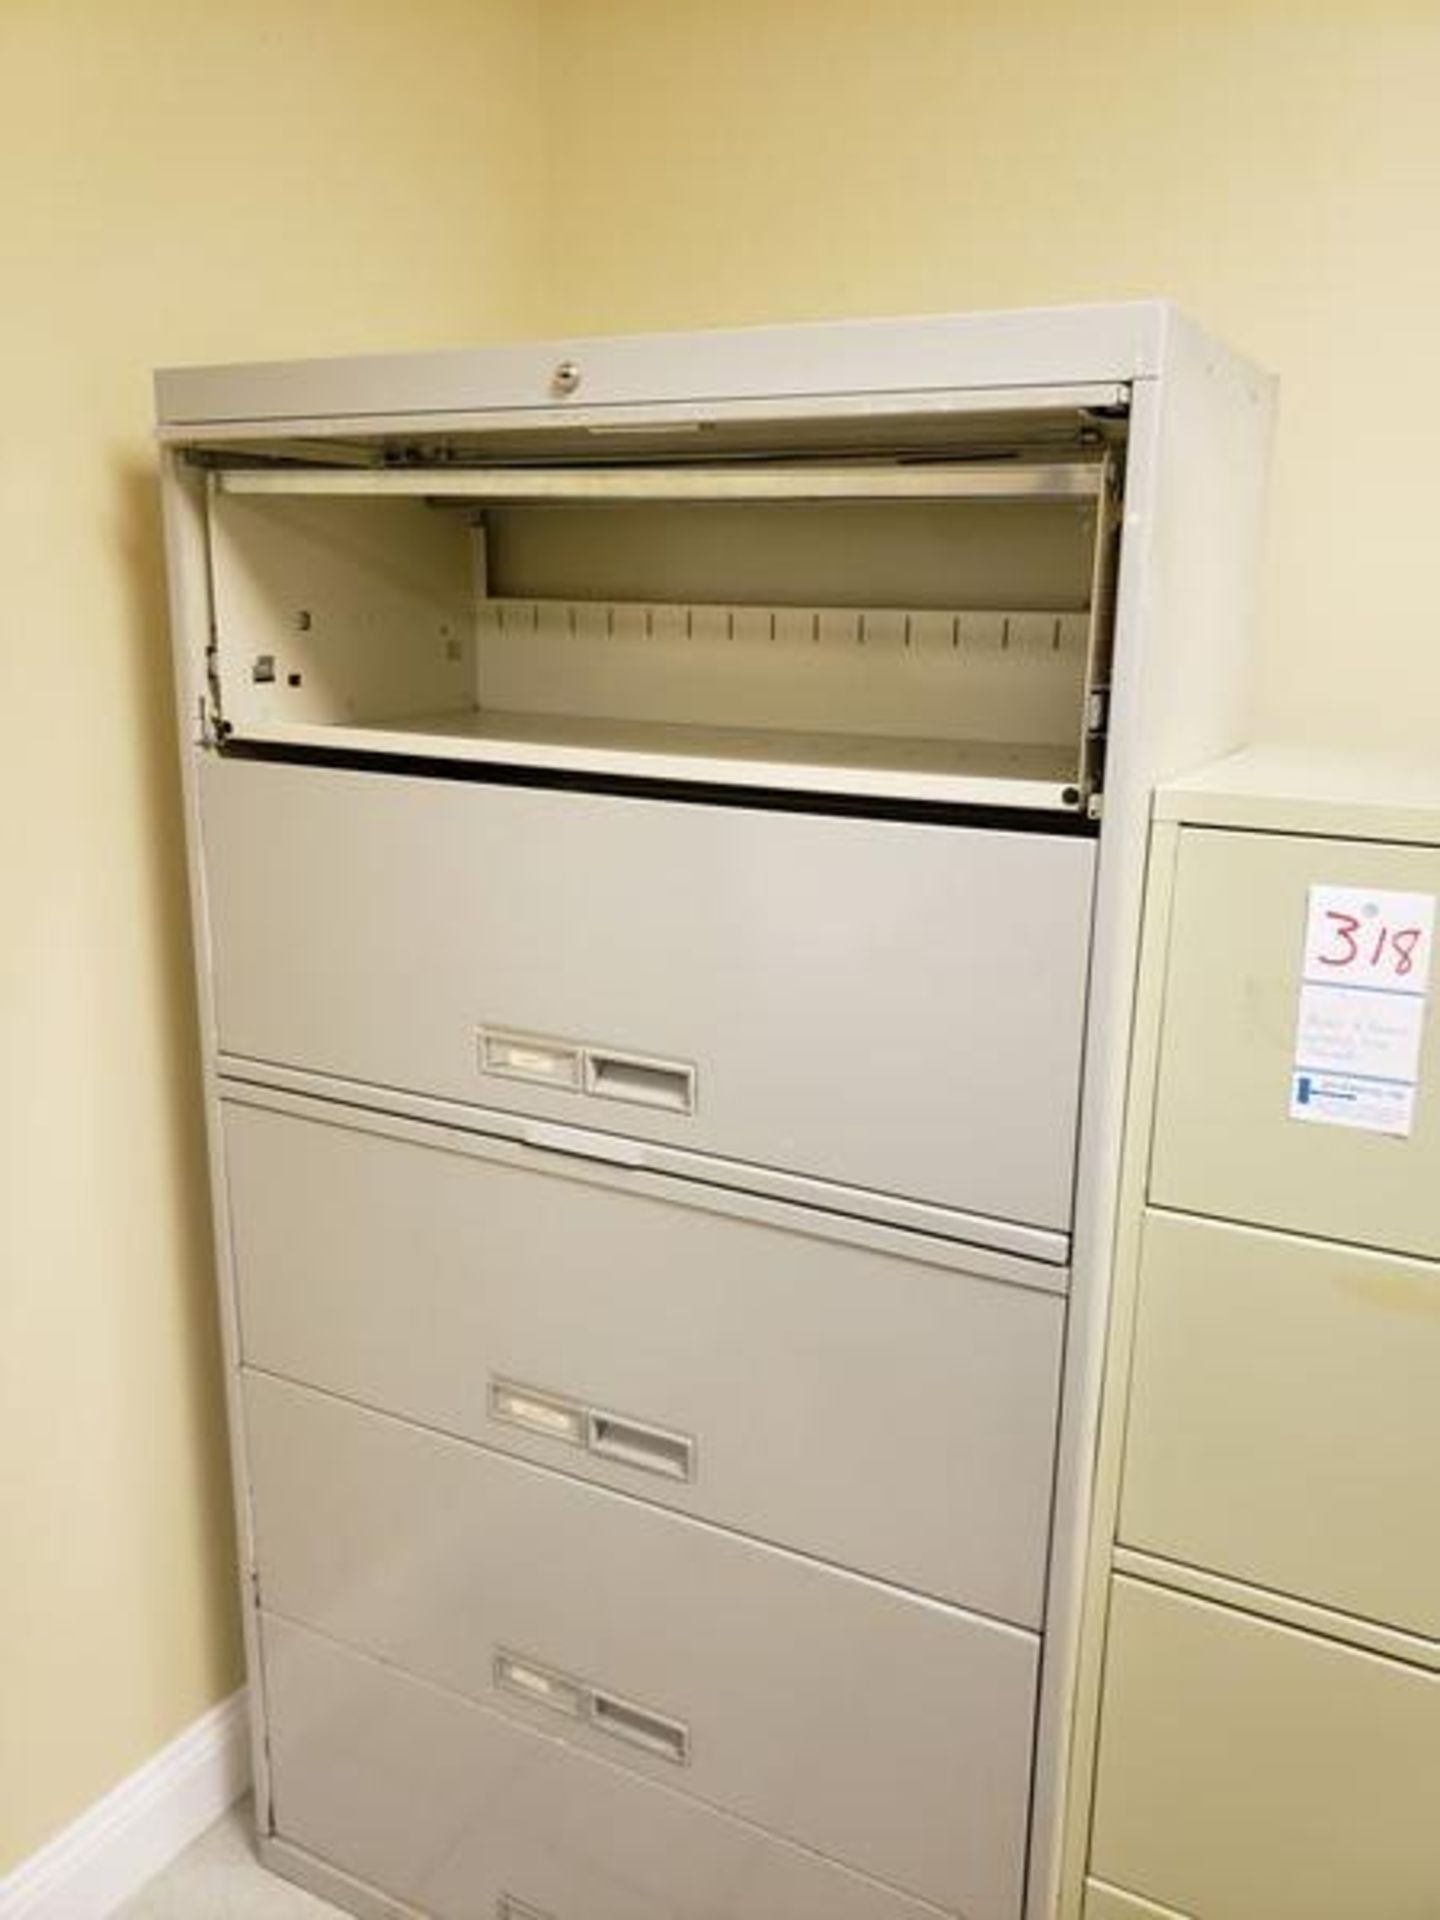 METAL 5 DRAWER LATER FILE CABINET - Image 2 of 2